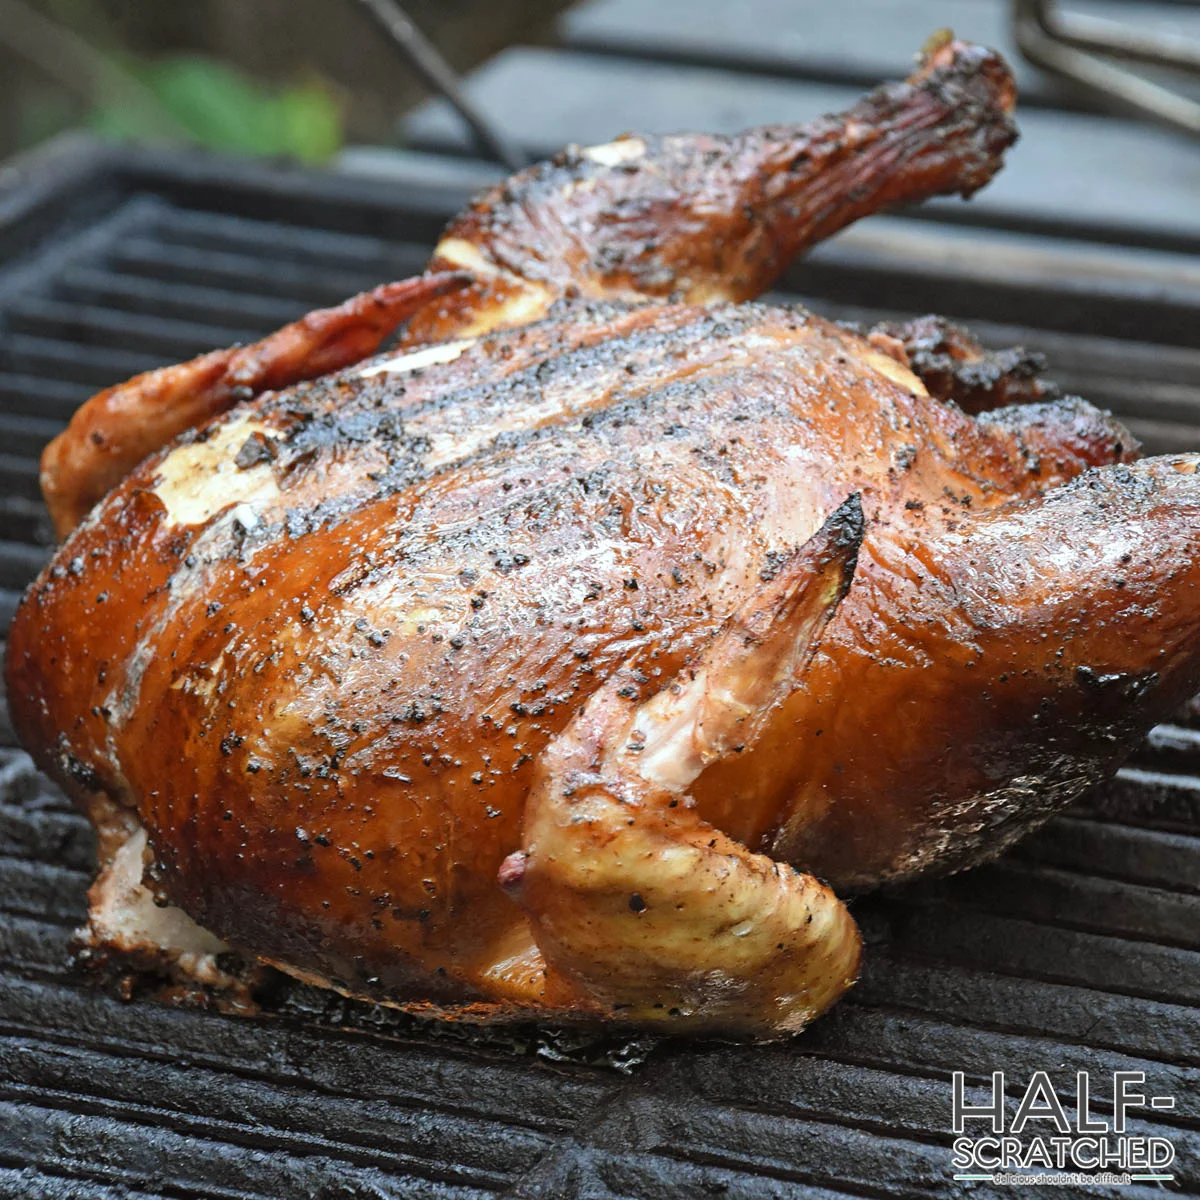 Smoked whole chicken at 225F